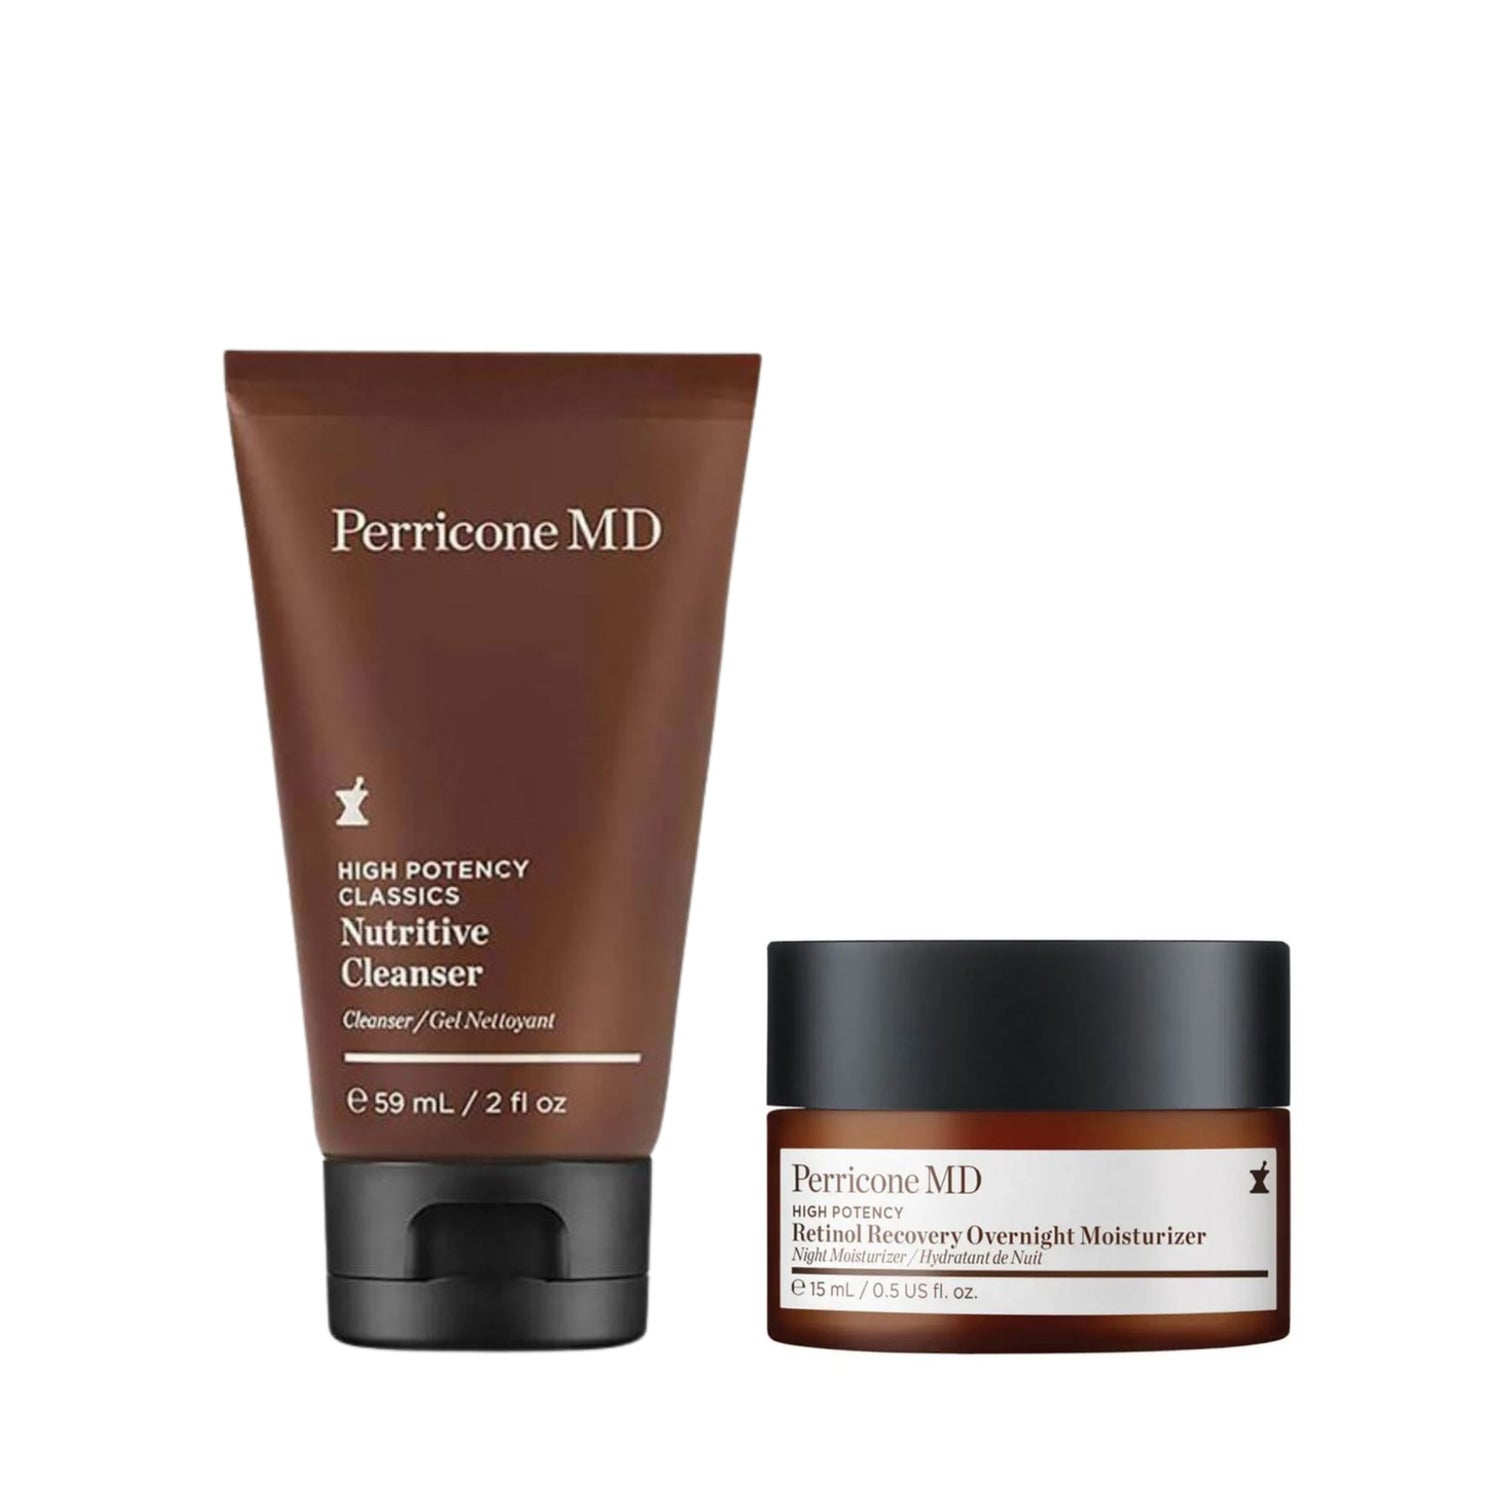 High Potency Cleanse & Moisturise Travel Duo (worth £36)